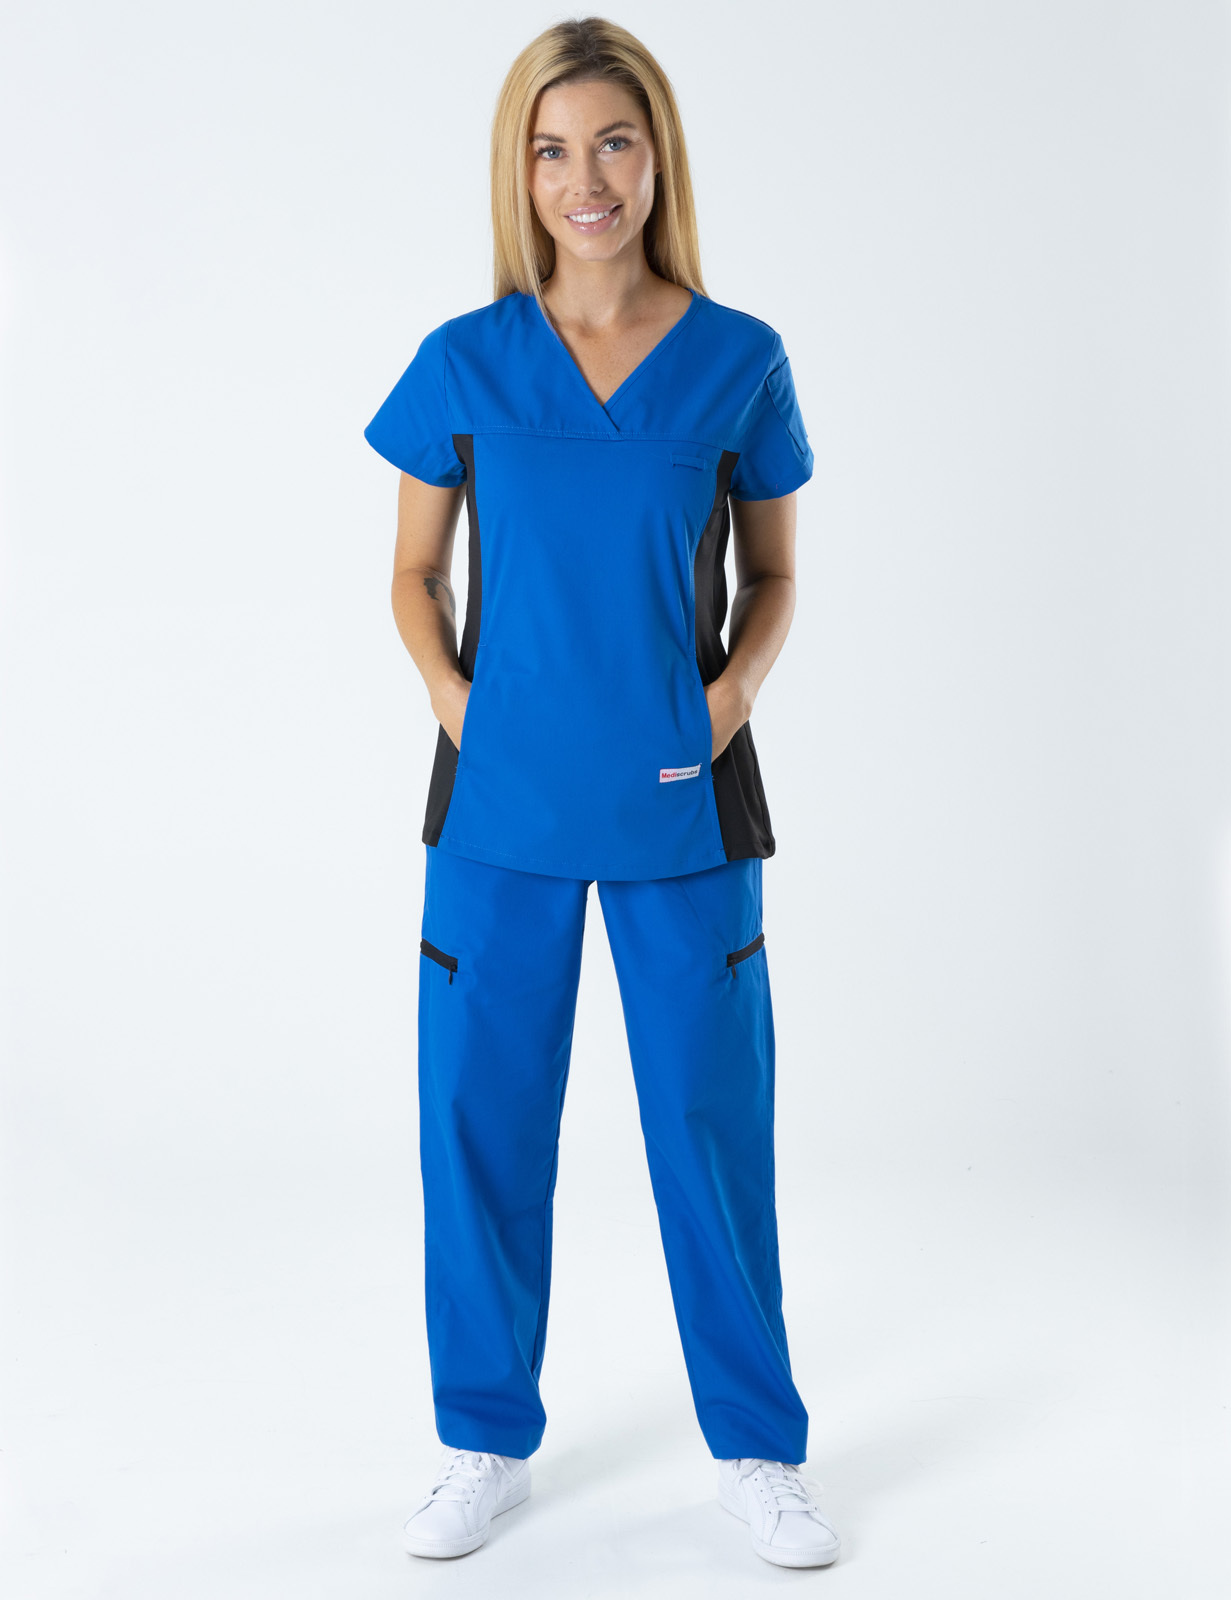 Children's Health Queensland (Women's Fit Spandex Scrub Top and Cargo Pants in Royal incl Logos)